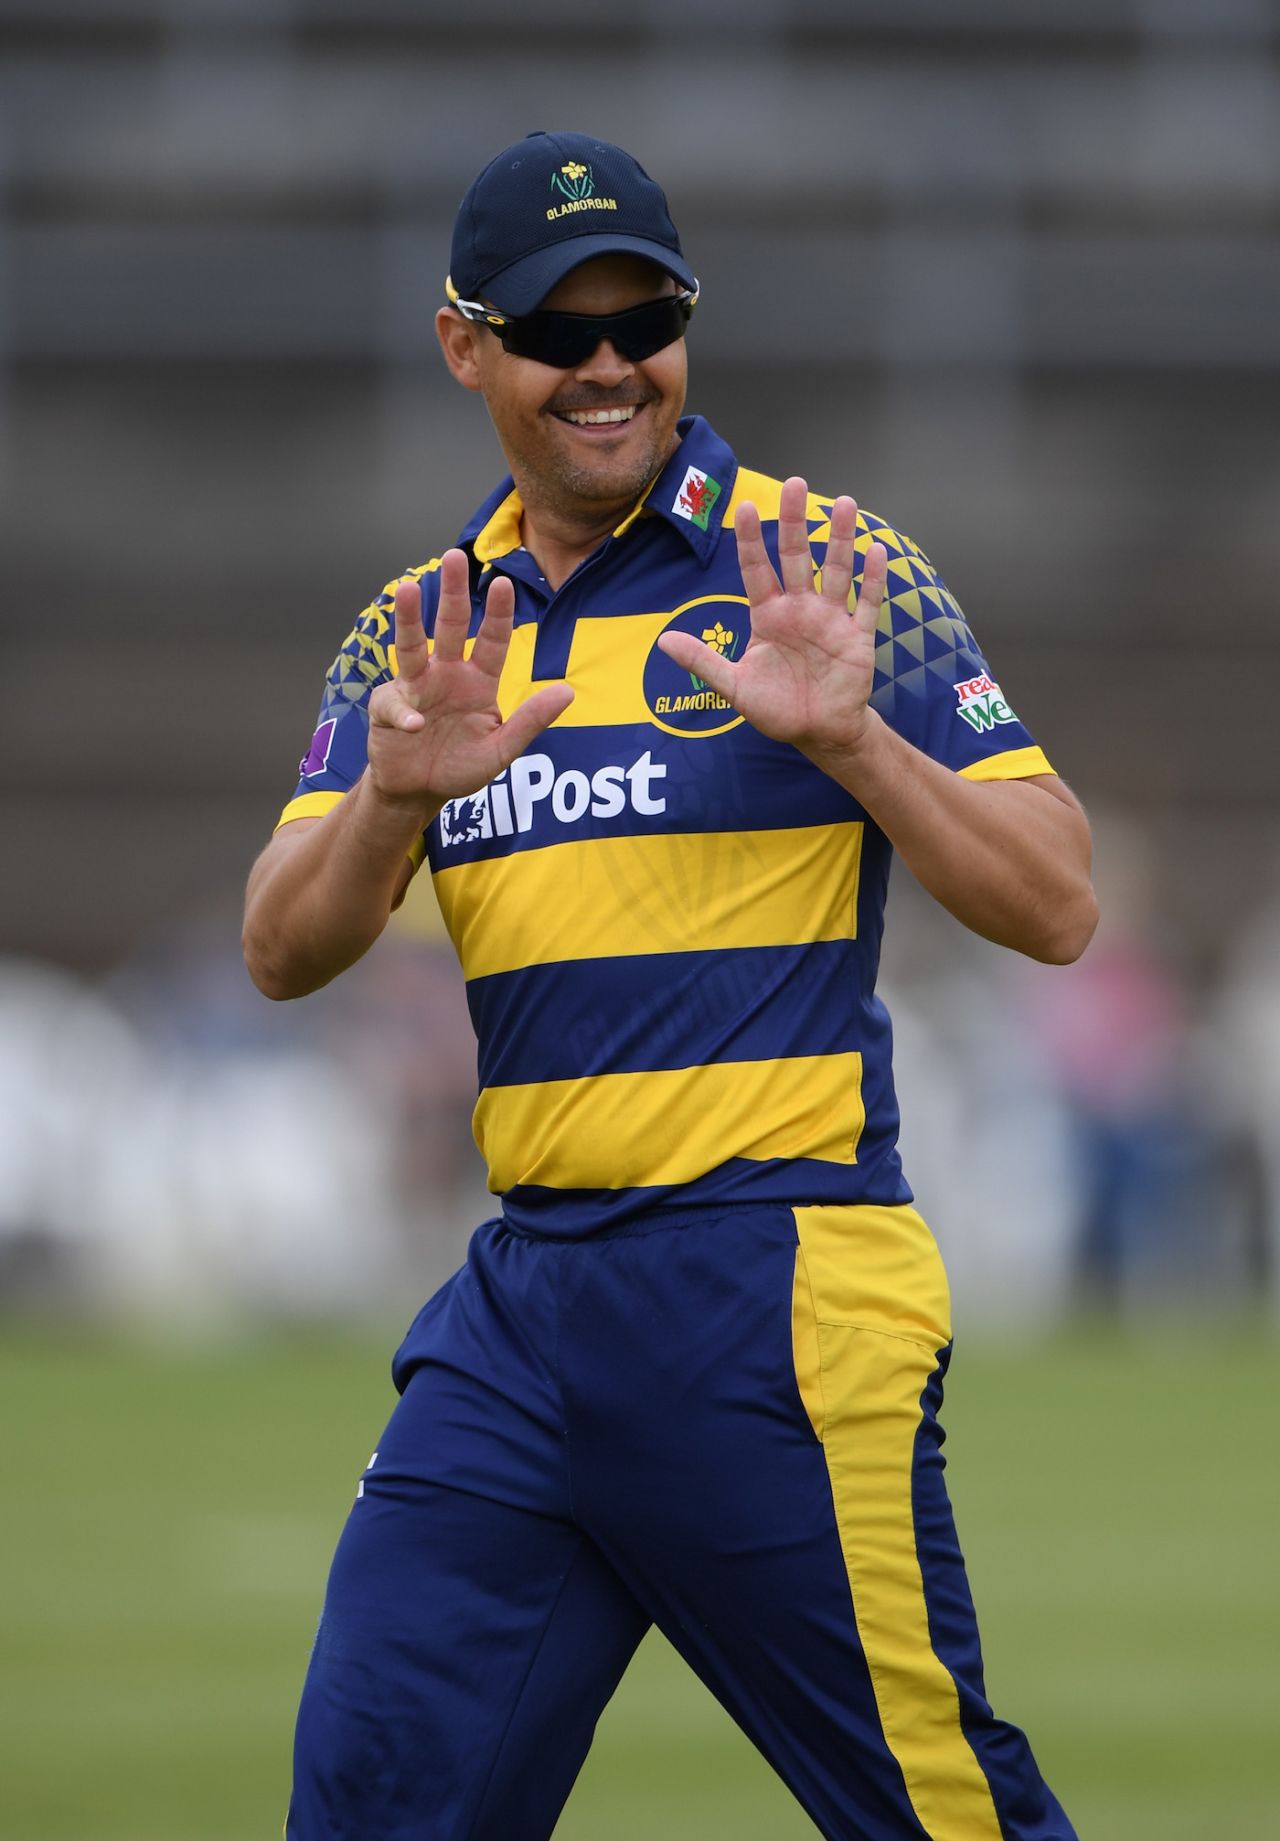 Jacques Rudolph has a bit of fun in the outfield, Glamorgan v Hampshire, Royal London One-Day Cup, St Helen's, Swansea, Wales, July 31, 2016